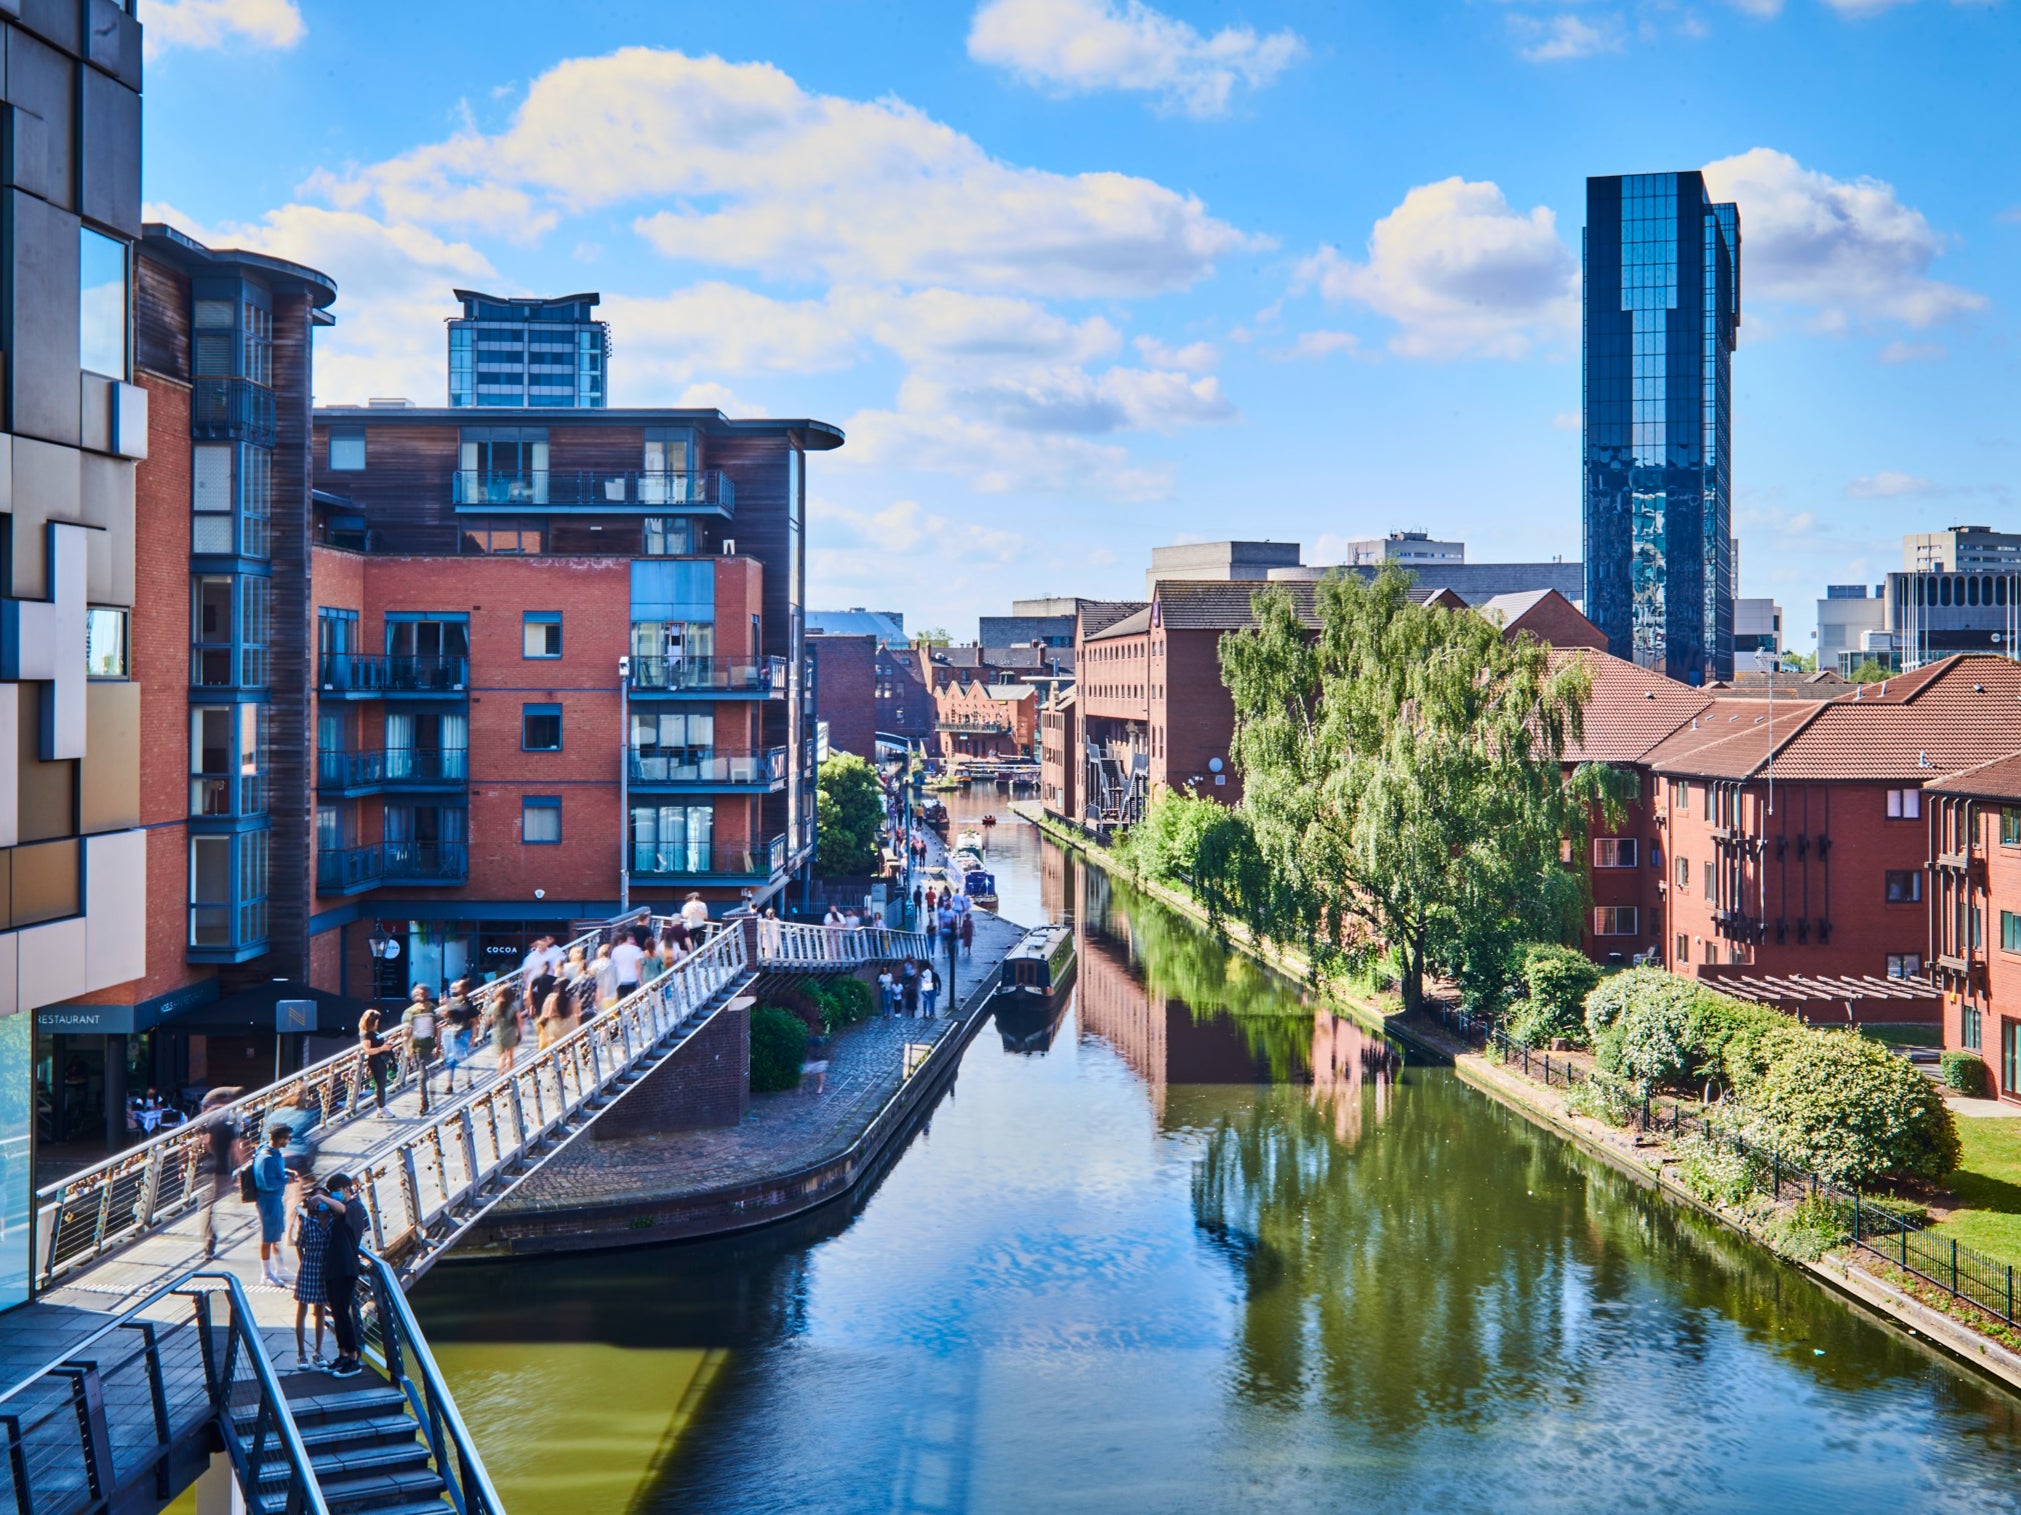 Birmingham has more kilometres of canals than Venice and Amsterdam